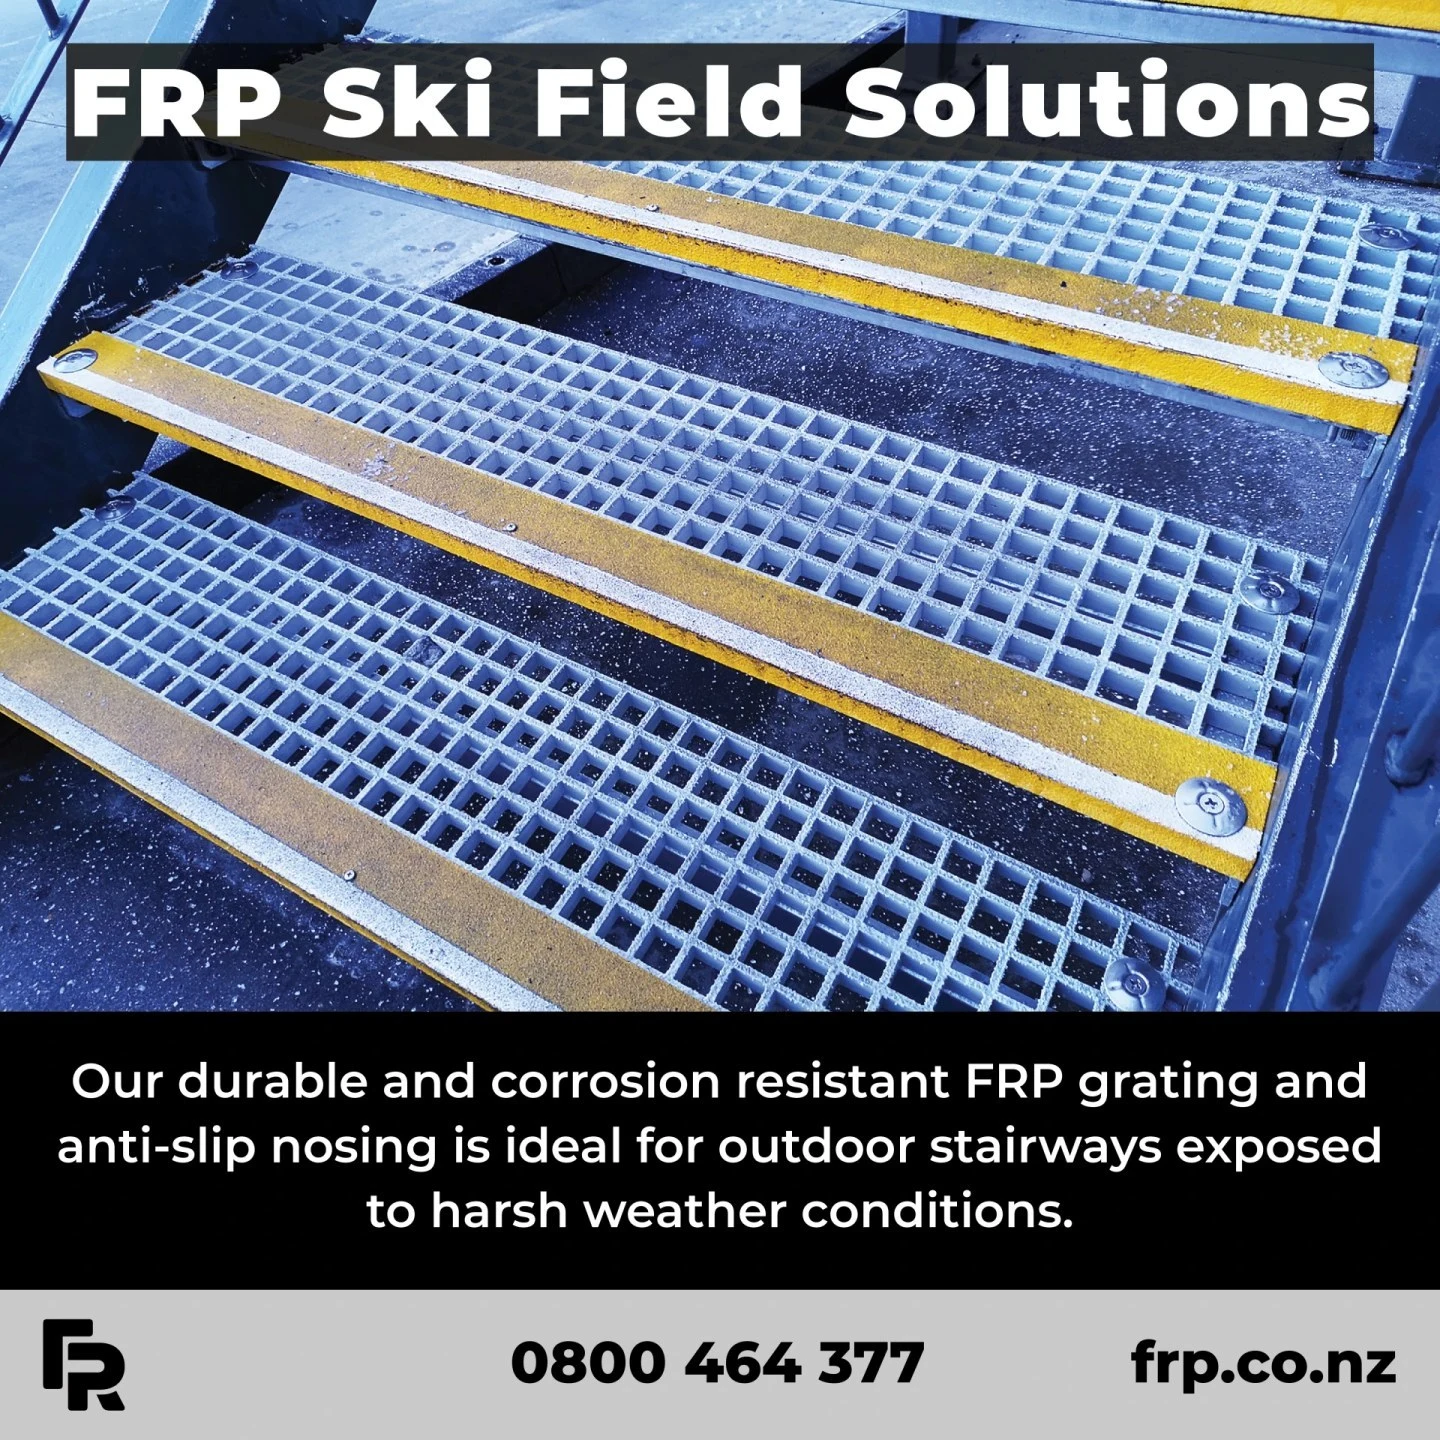 Got a question? Enquire today!

#frp #frpproducts #commercial #stairways #skifield #outdoorspaces #walkways #publicspaces #nzarchitects